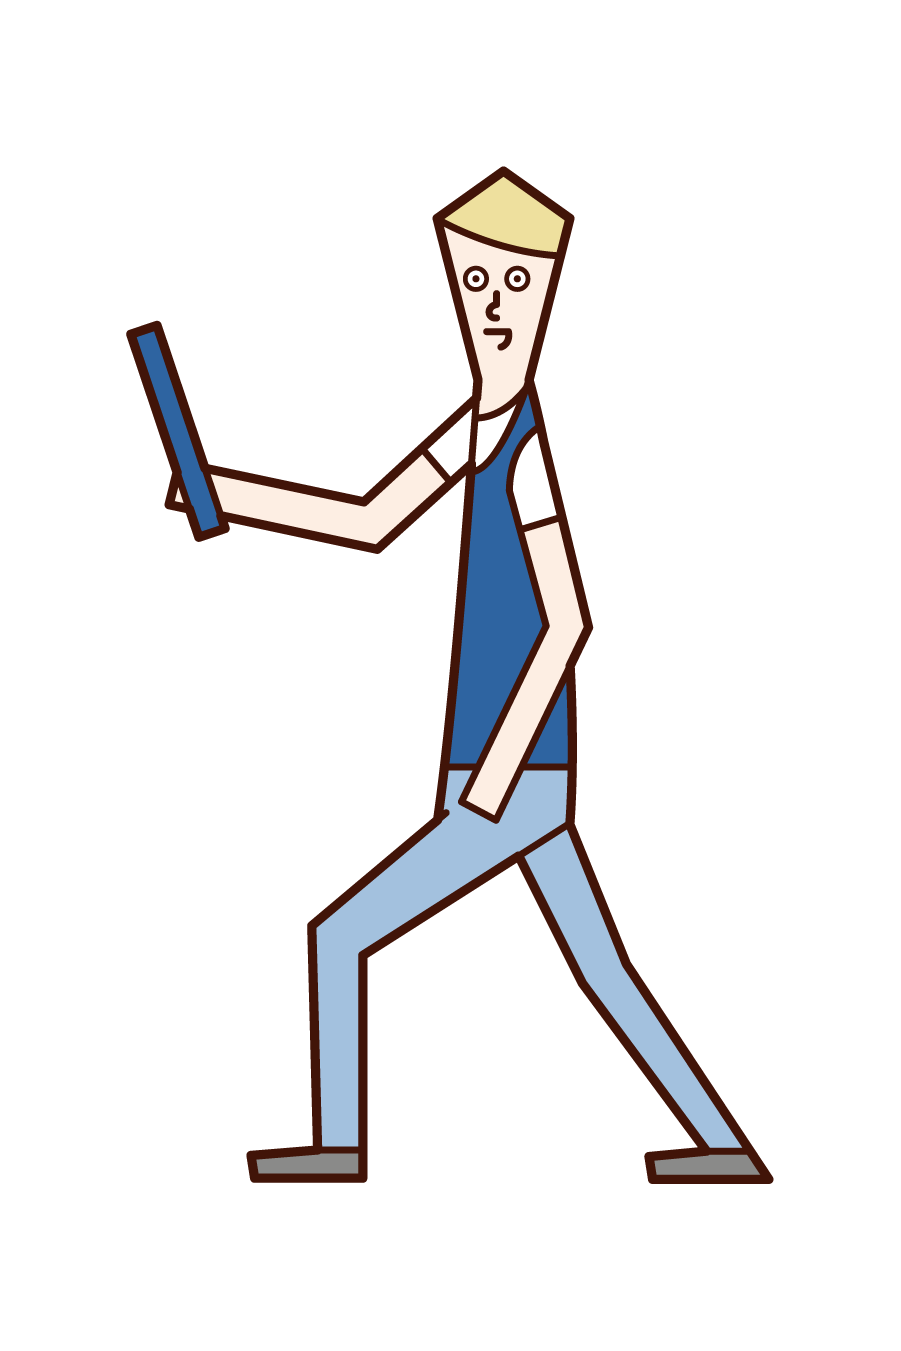 Illustration of a man throwing a rod